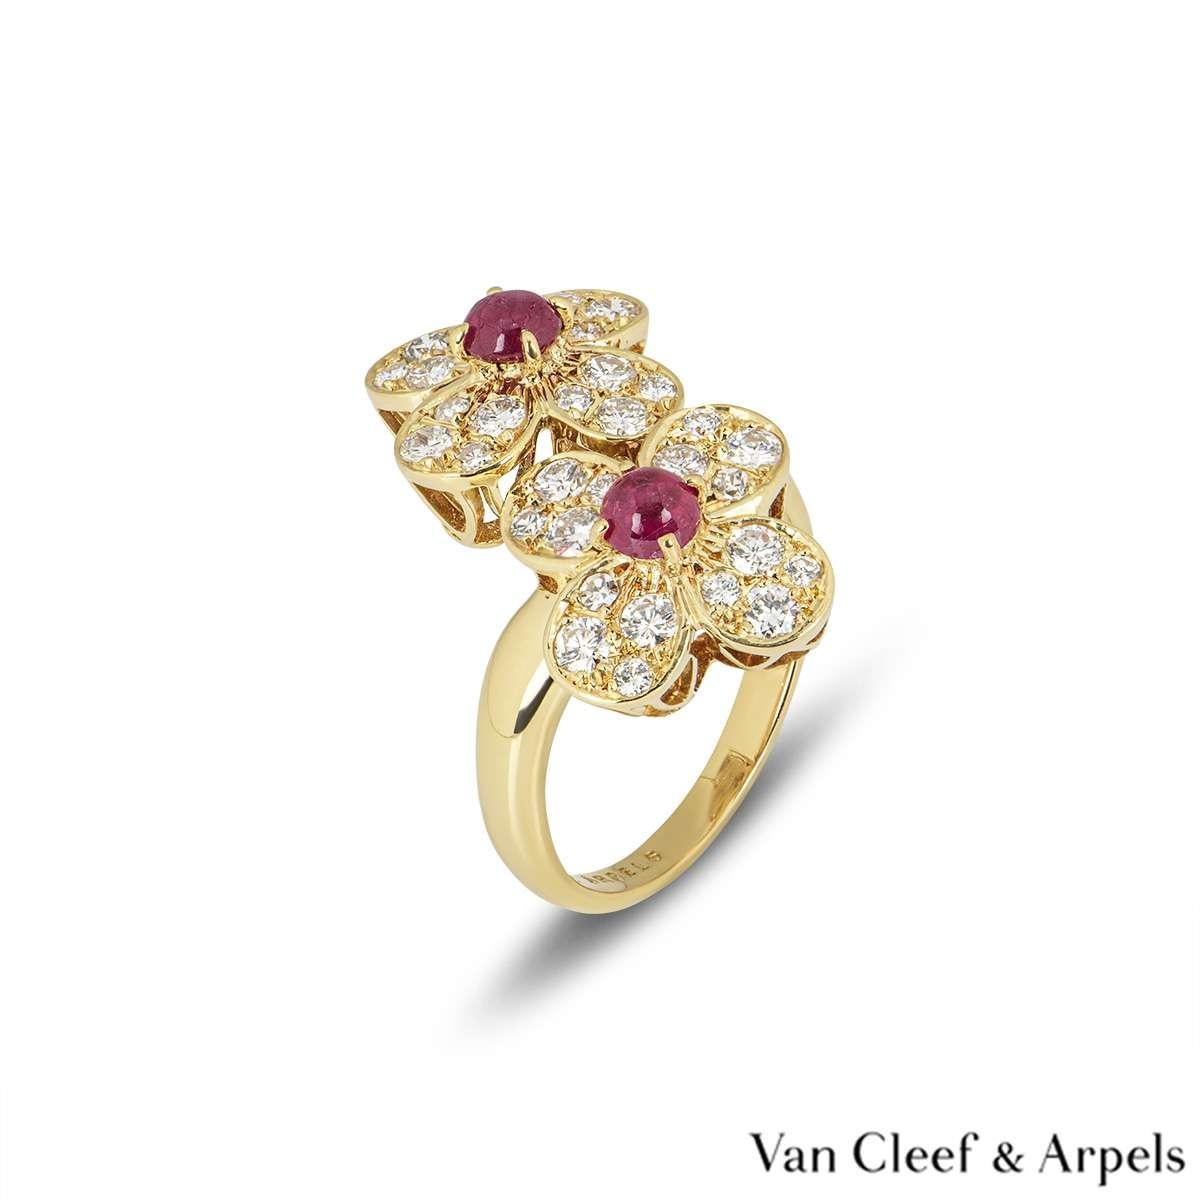 A beautiful 18k yellow gold Van Cleef & Arpels ring from the Trefle collection. The ring comprises of two flower motifs, with a cabochon cut ruby in the centre. Complementing the rubies are round brilliant cut diamond set petals totalling